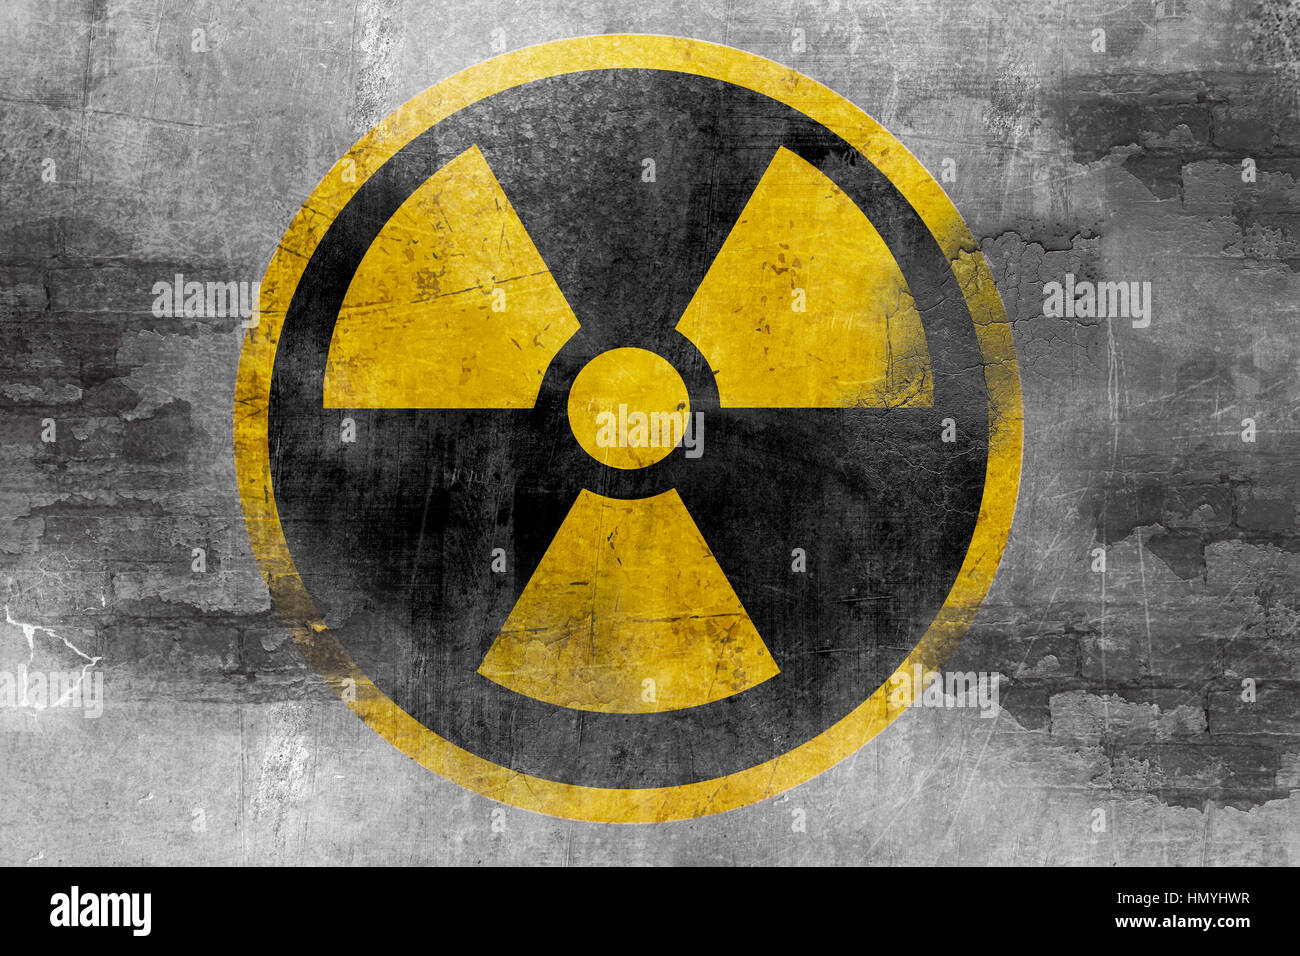 nuclear reactor symbol Stock Photo